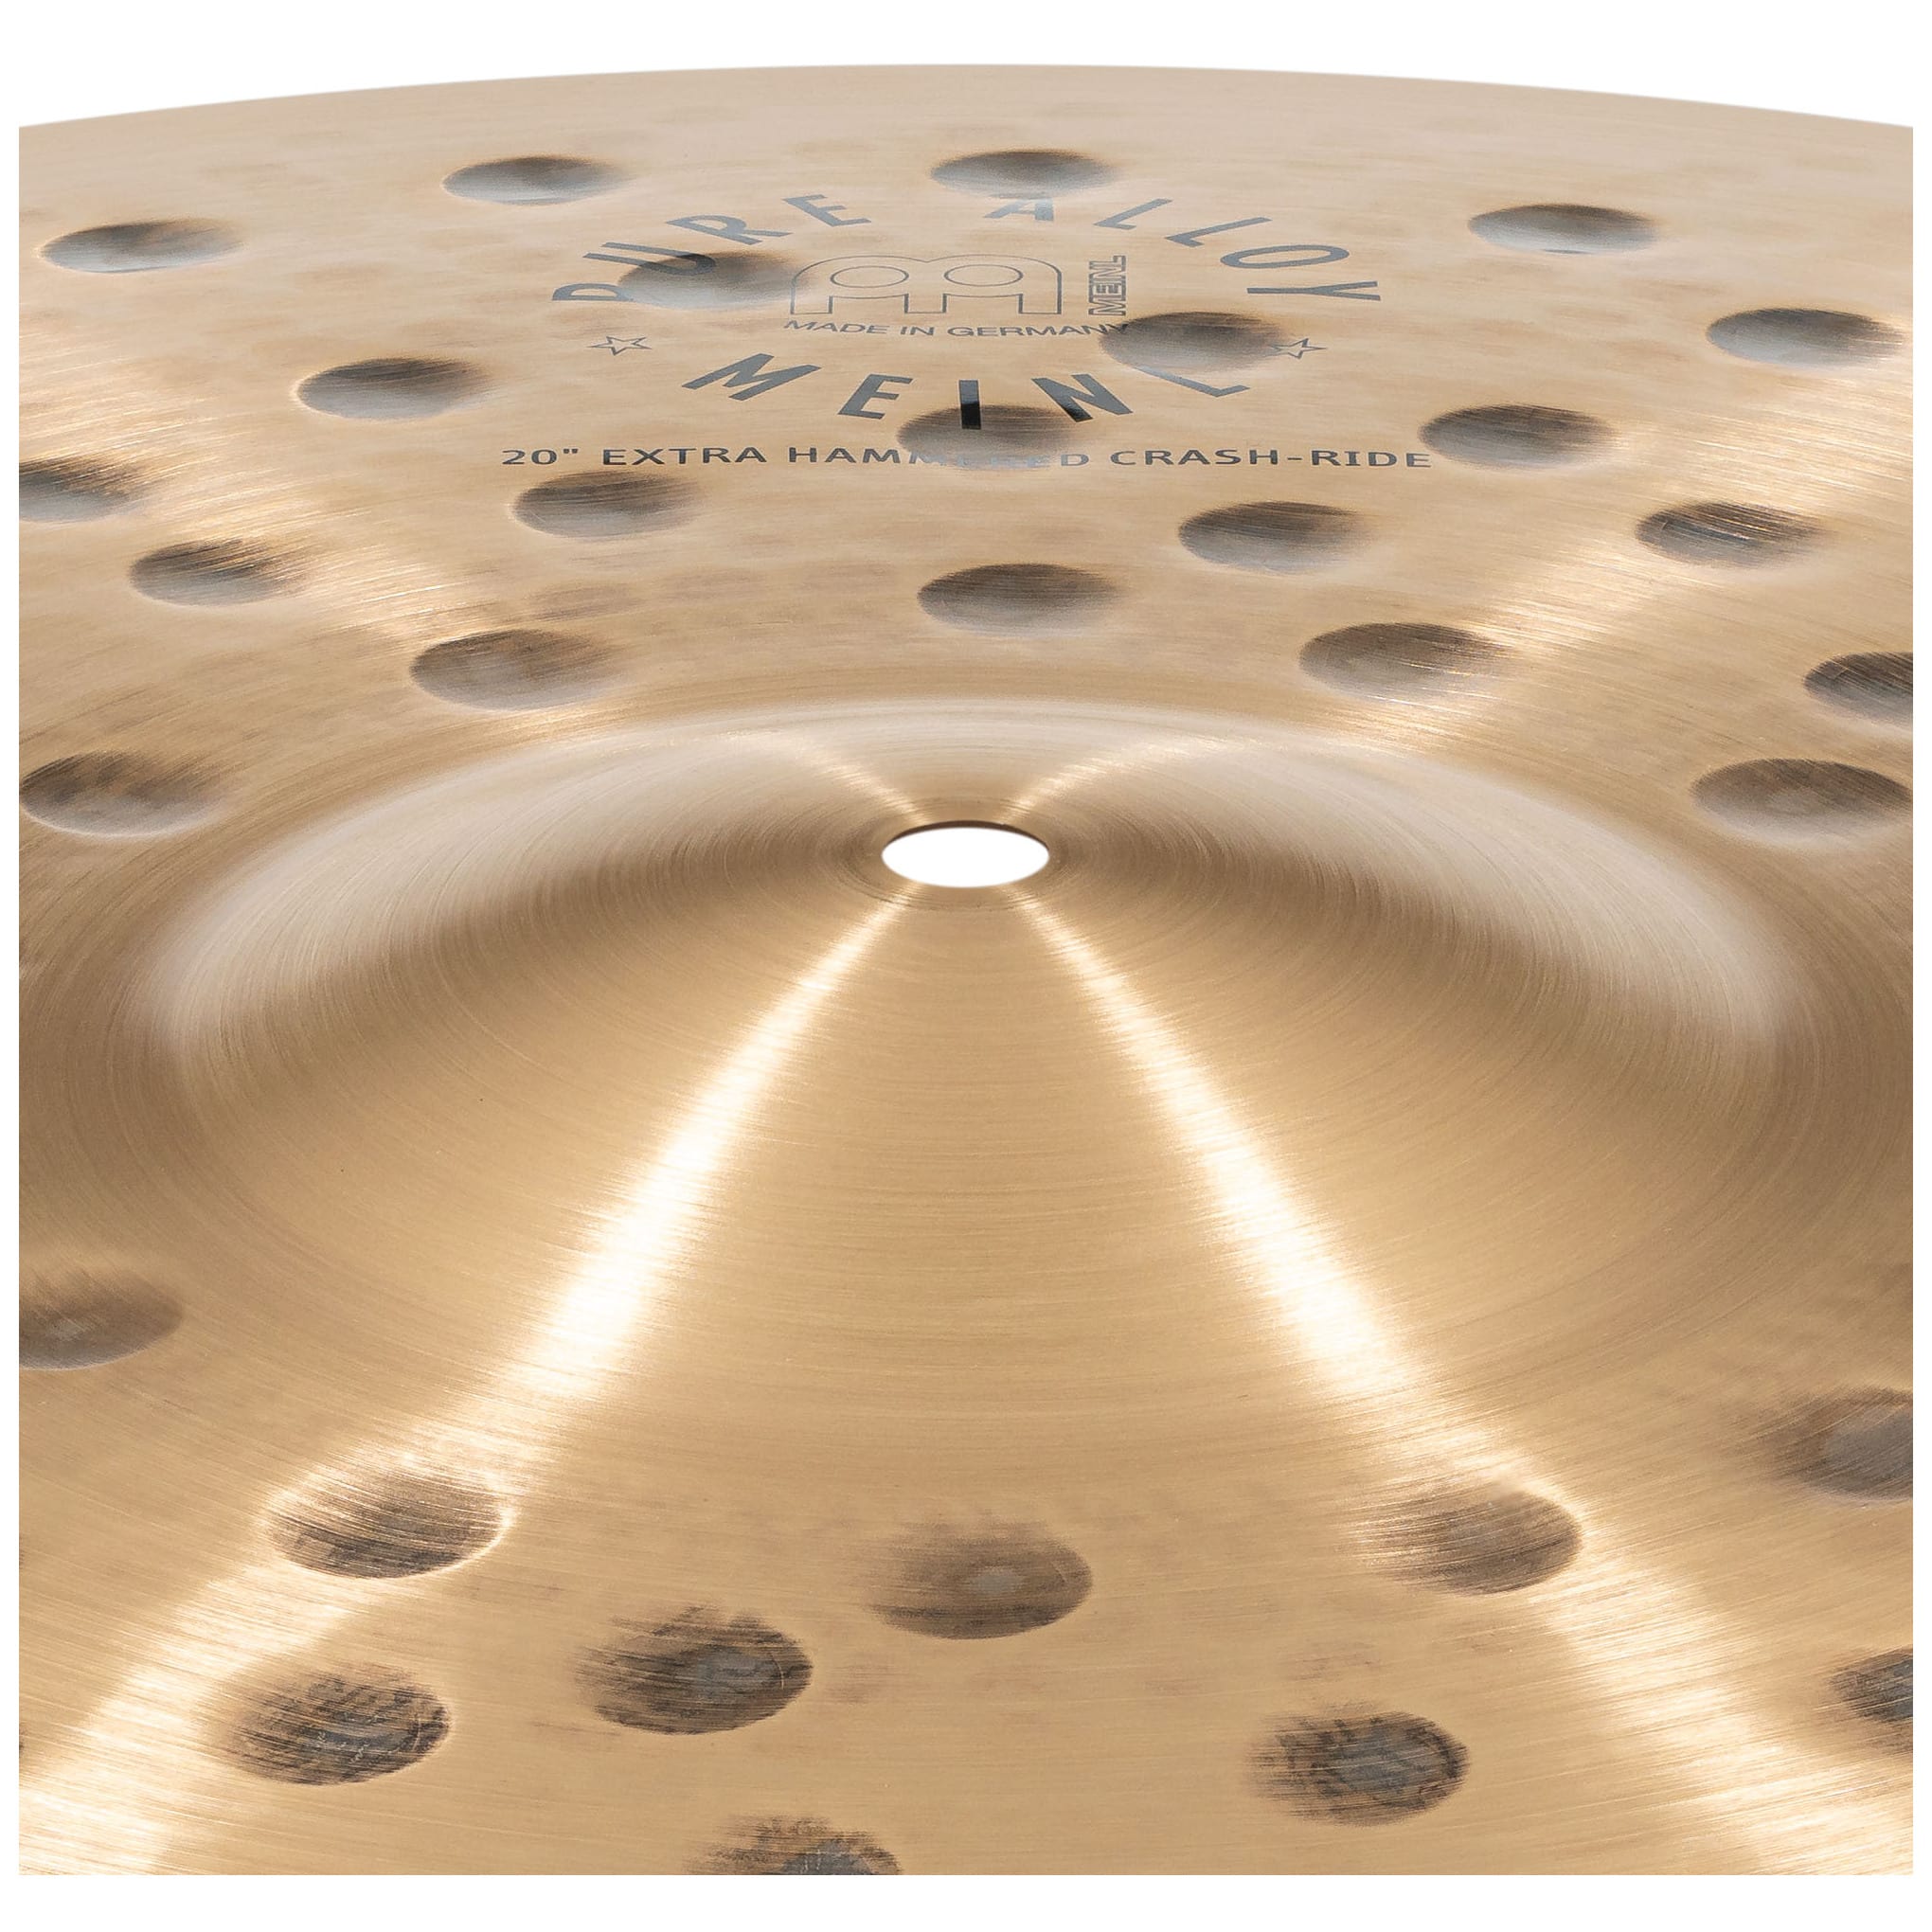 Meinl Cymbals PA22EHCR - 22" Pure Alloy Extra Hammered CrashRide 7